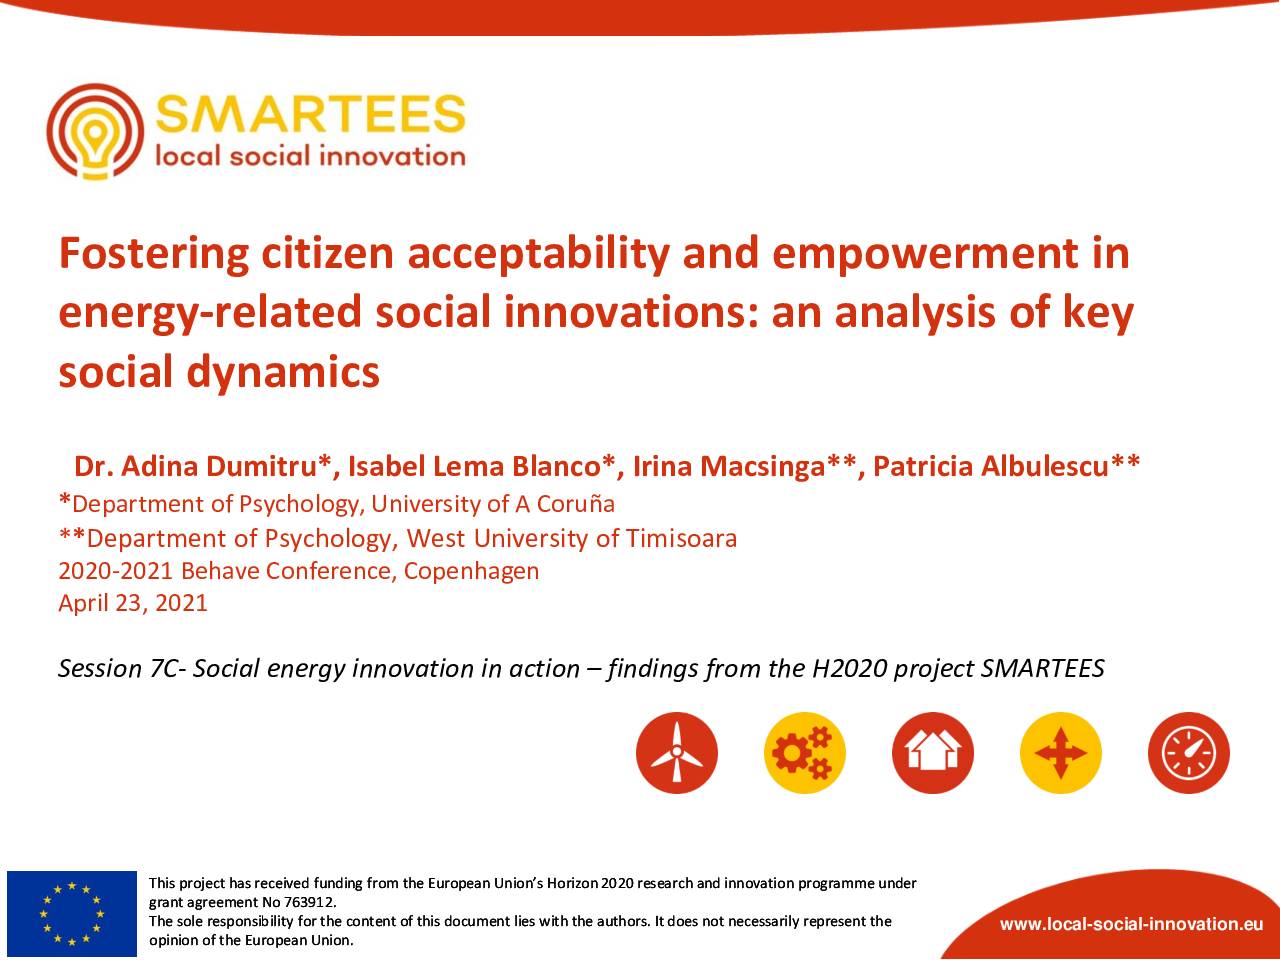 Fostering citizen acceptability and empowerment in energy-related social innovations an analysis of key social dynamics